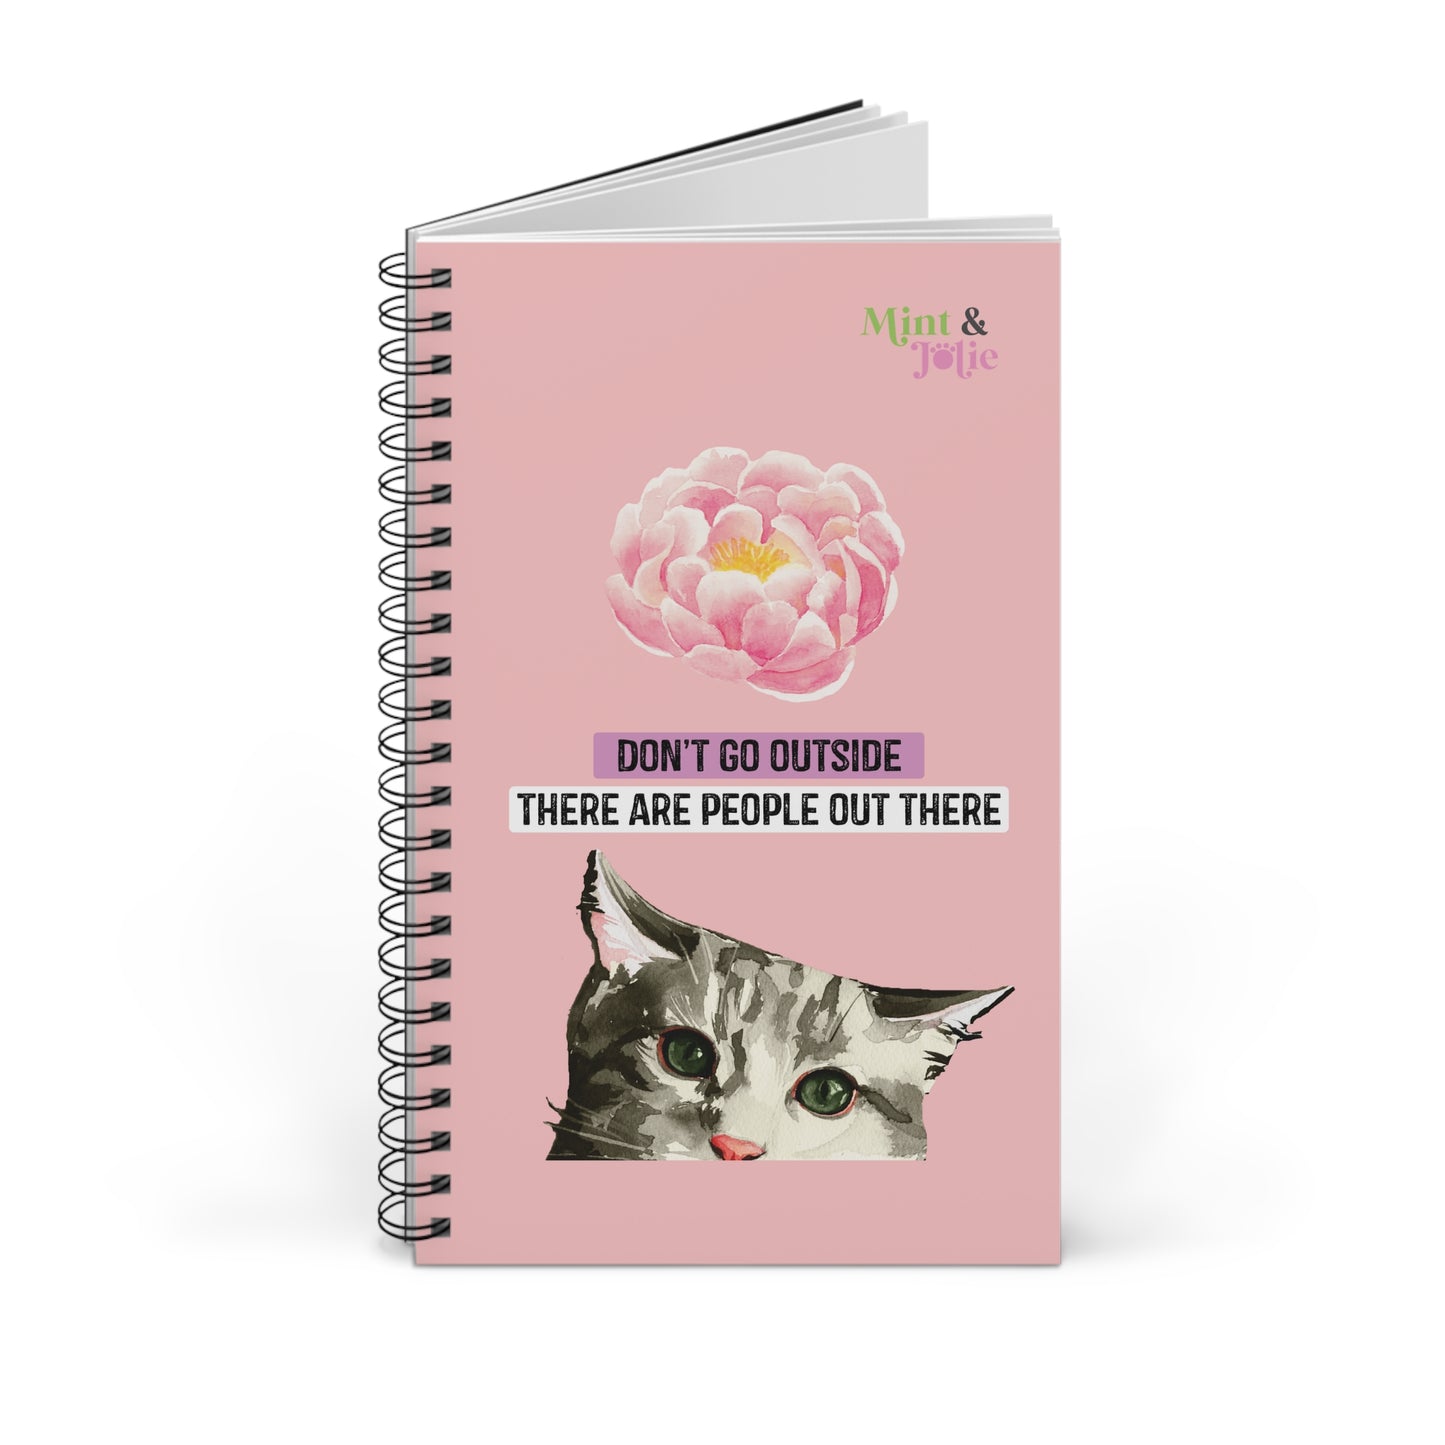 Don't Go Outside There are people out there cat Spiral Journal